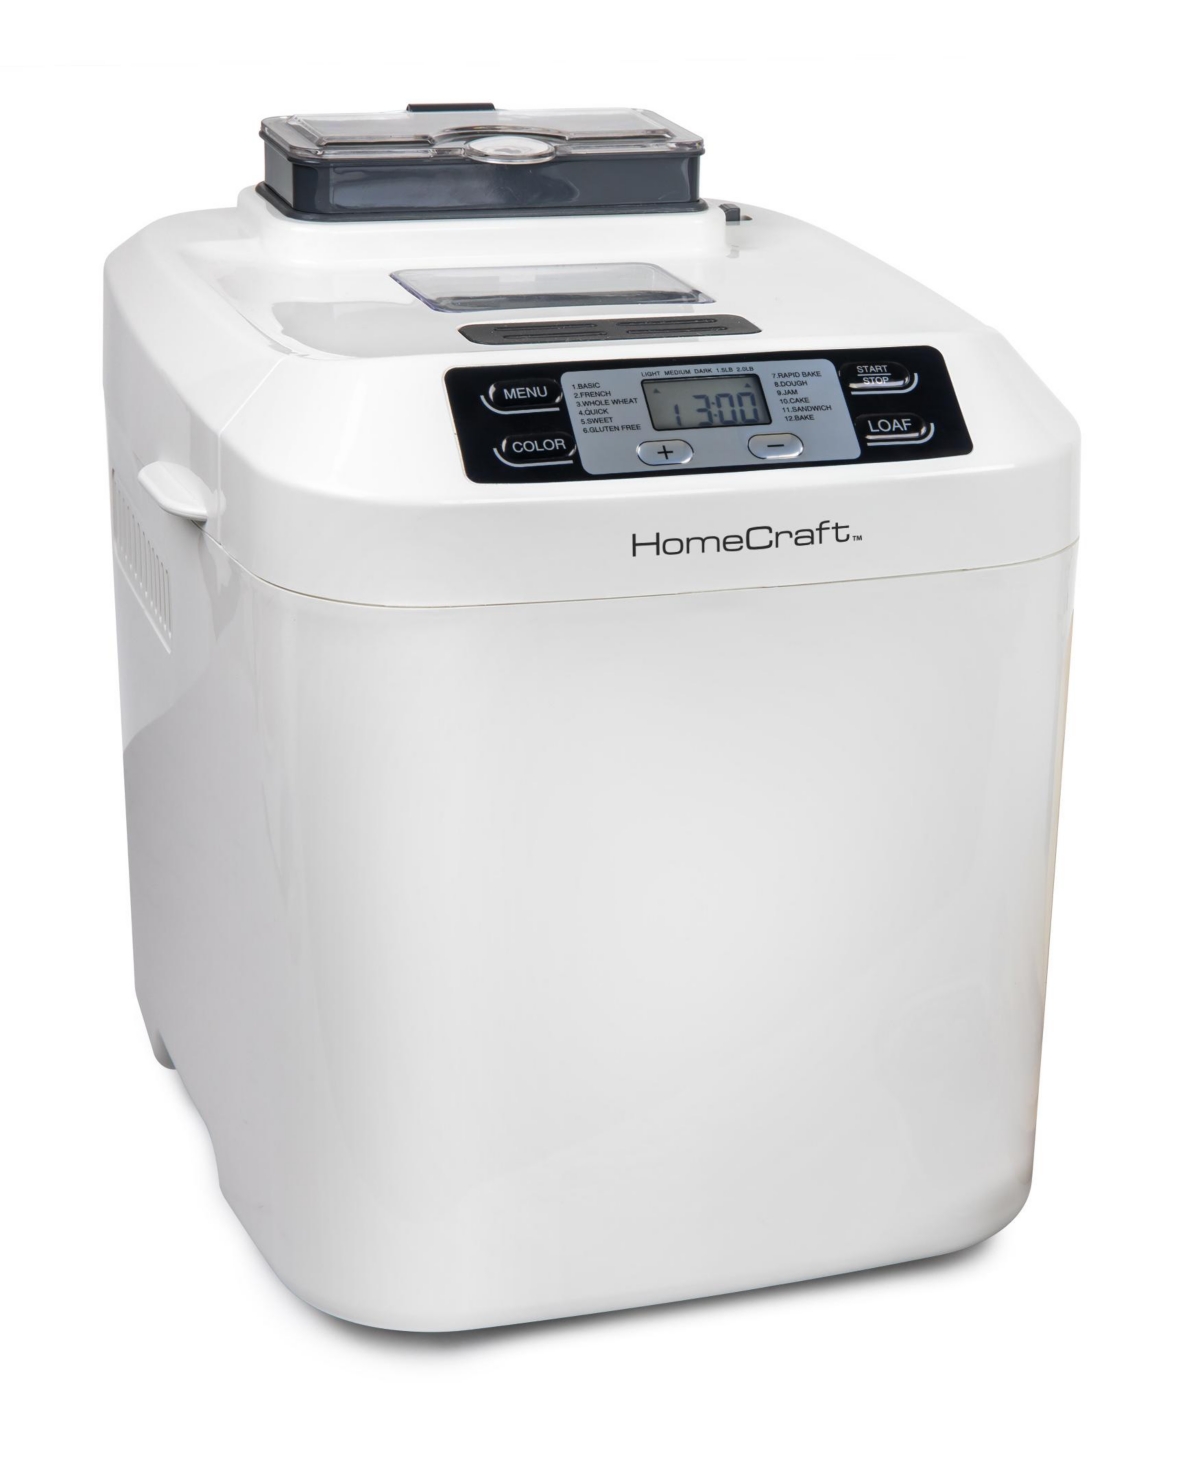 HomeCraft HCPBMAD2WH Programmable Bread Maker with Auto Dispenser